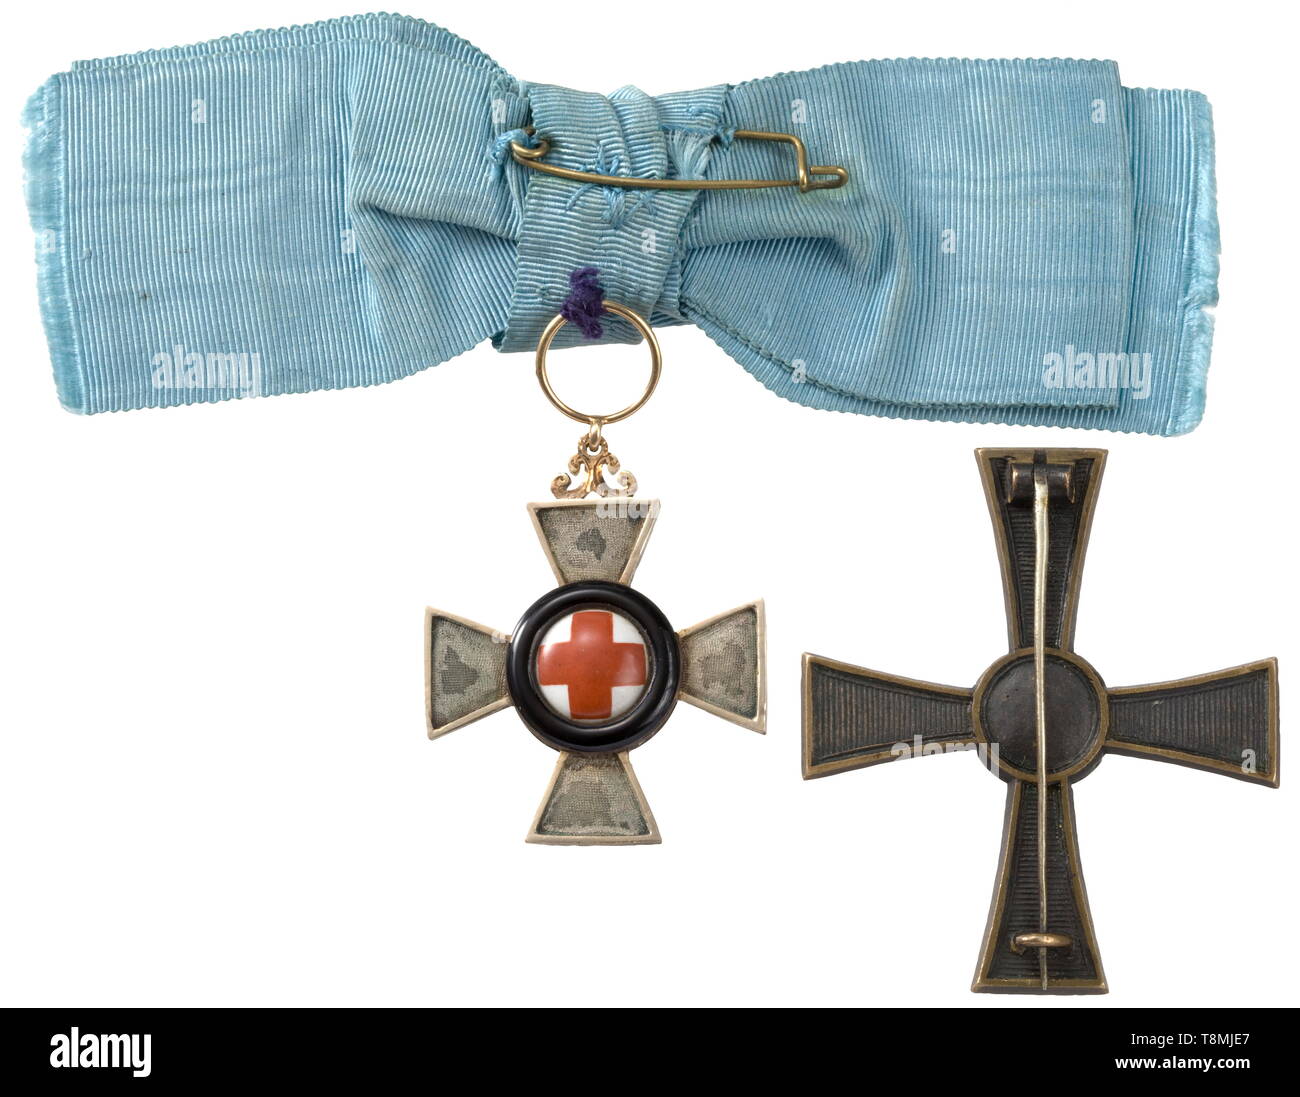 A Commemorative Badge for Meritorious Achievements in the war year 1866 Oxidised bronze cross of the original type produced by the bronzeware manufactory of Christian Hörner in Munich. On a thin attachment pin. Width 46.5 mm. Weight 19 g. The so-called 'Doctor's Cross' was awarded to civilian physicians who hurried to provide assistance during the 1866 war. A total of 359 awards were made. Included is a Merit Cross for the years 1870/71 in good condition on a lady's bow. historic, historical, medal, decoration, medals, decorations, badge of honou, Additional-Rights-Clearance-Info-Not-Available Stock Photo